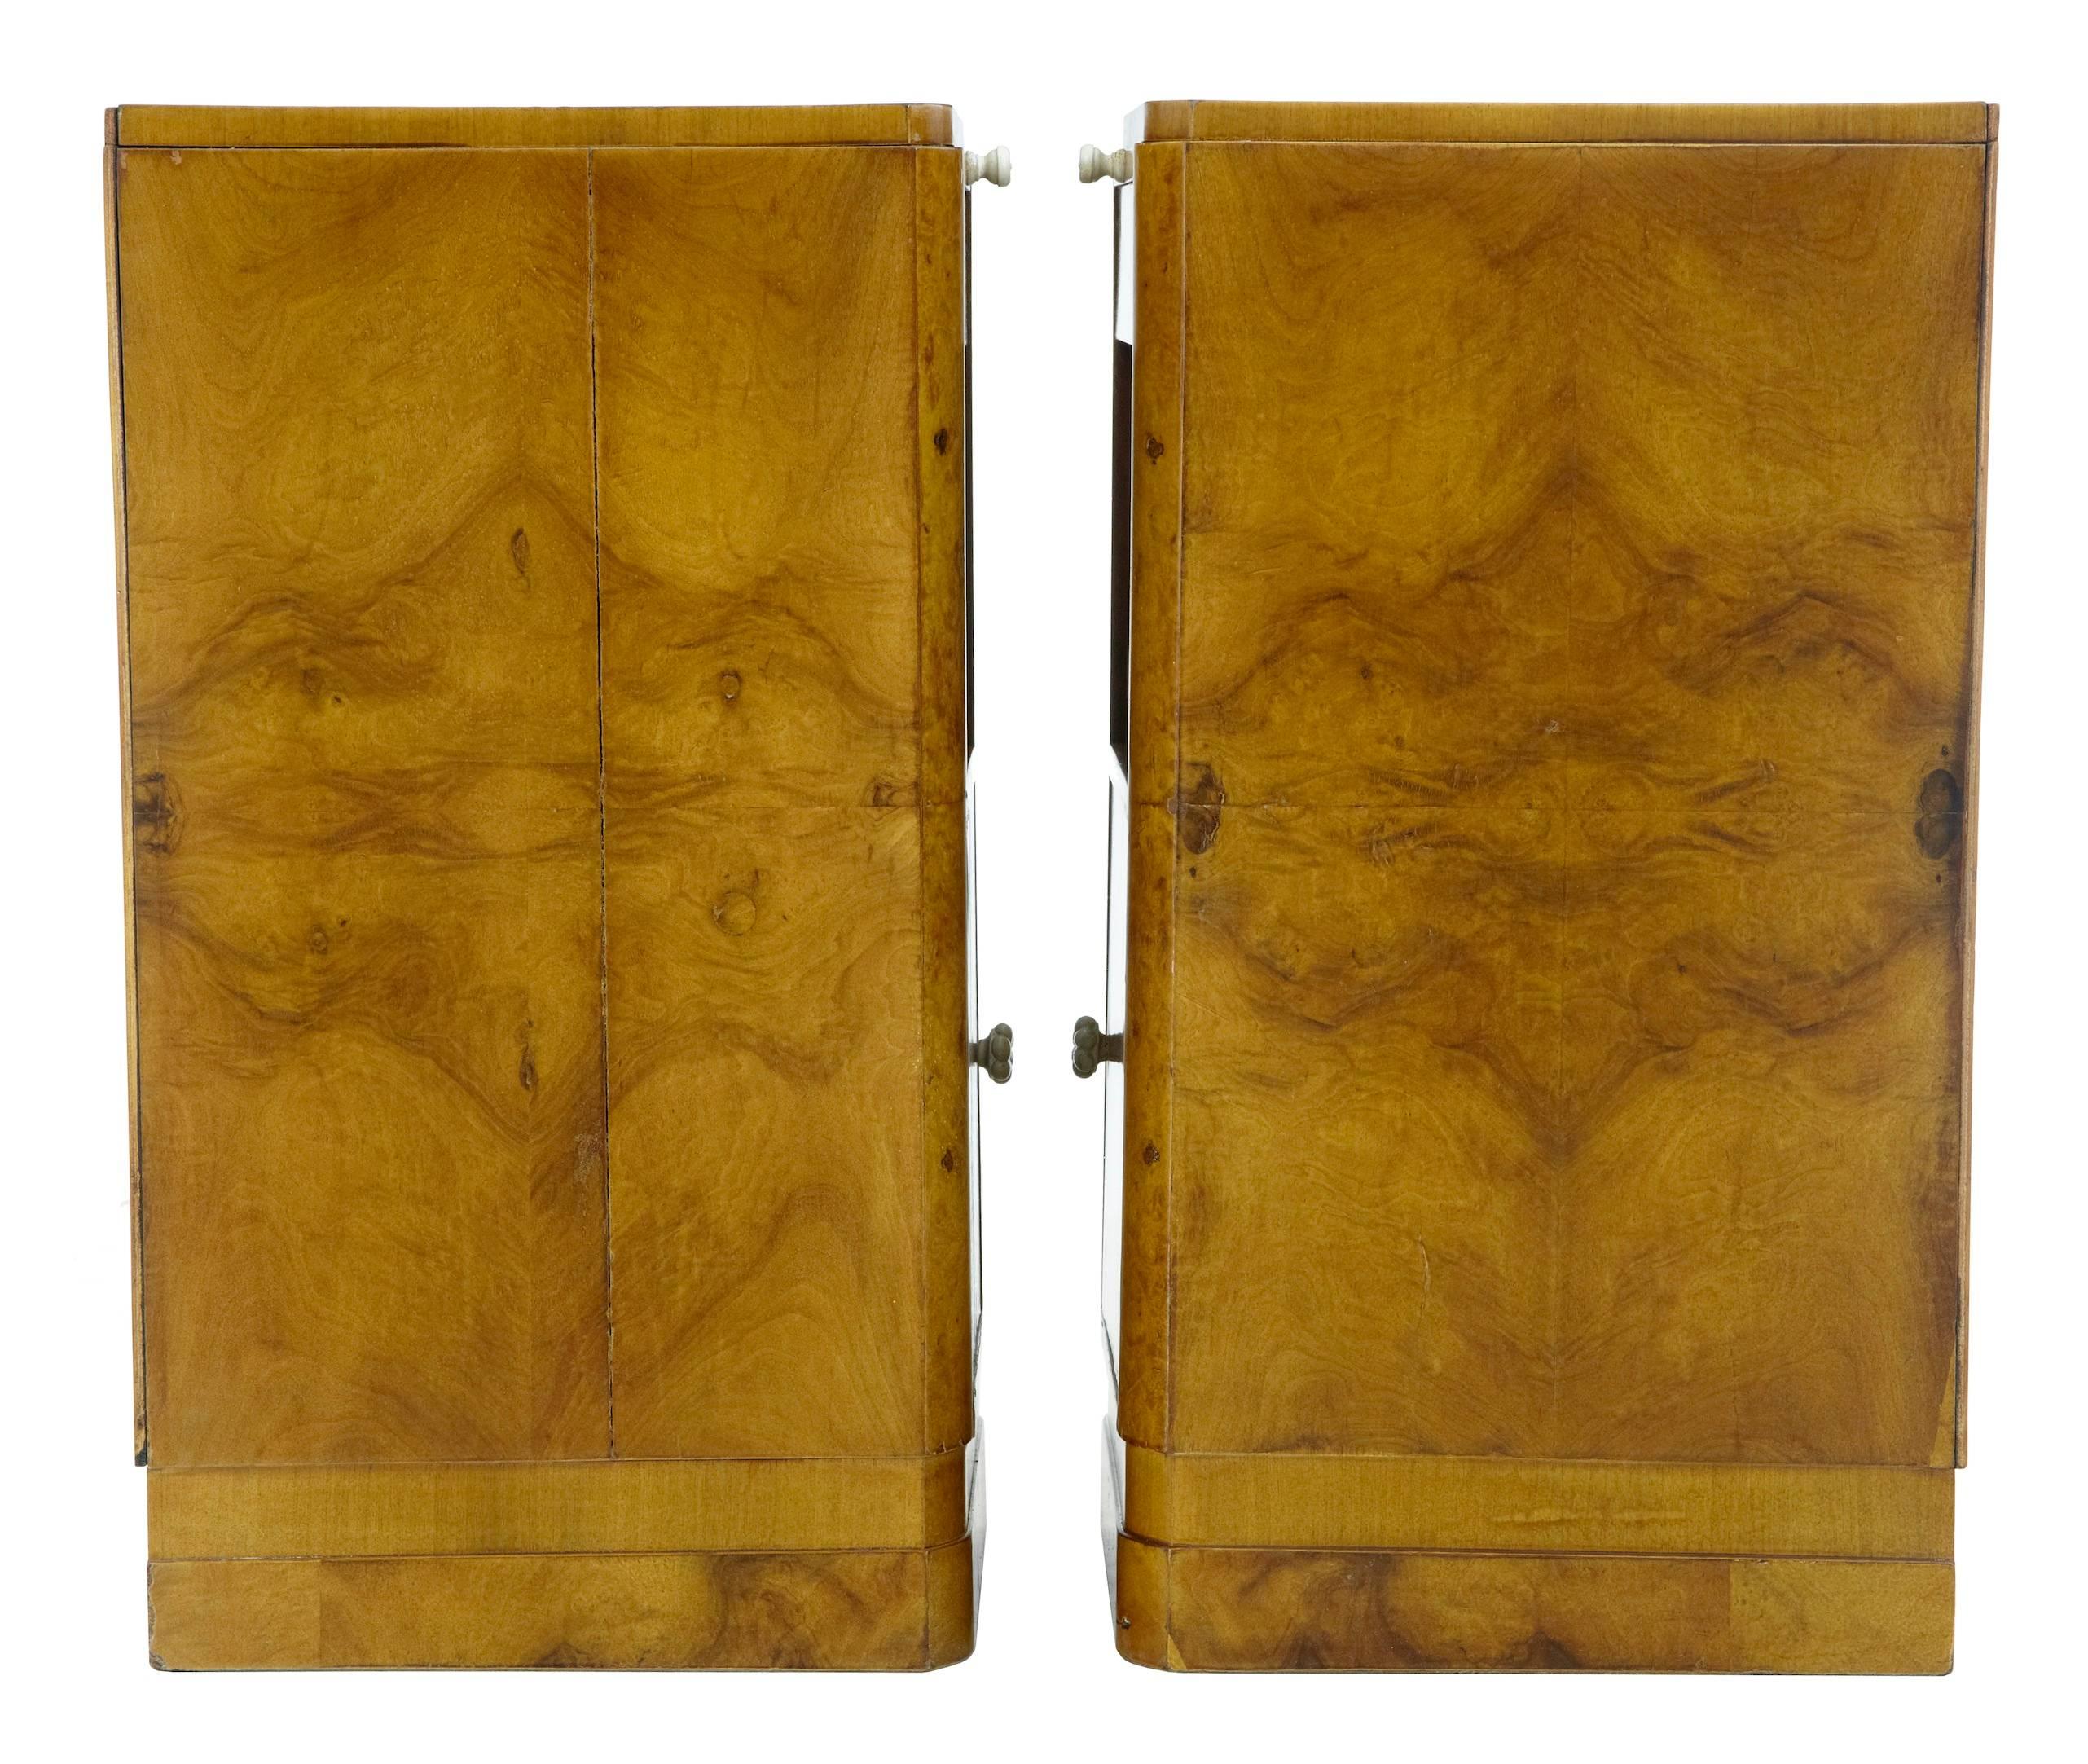 Woodwork Pair of 20th Century Art Deco Walnut Bedside Cabinets